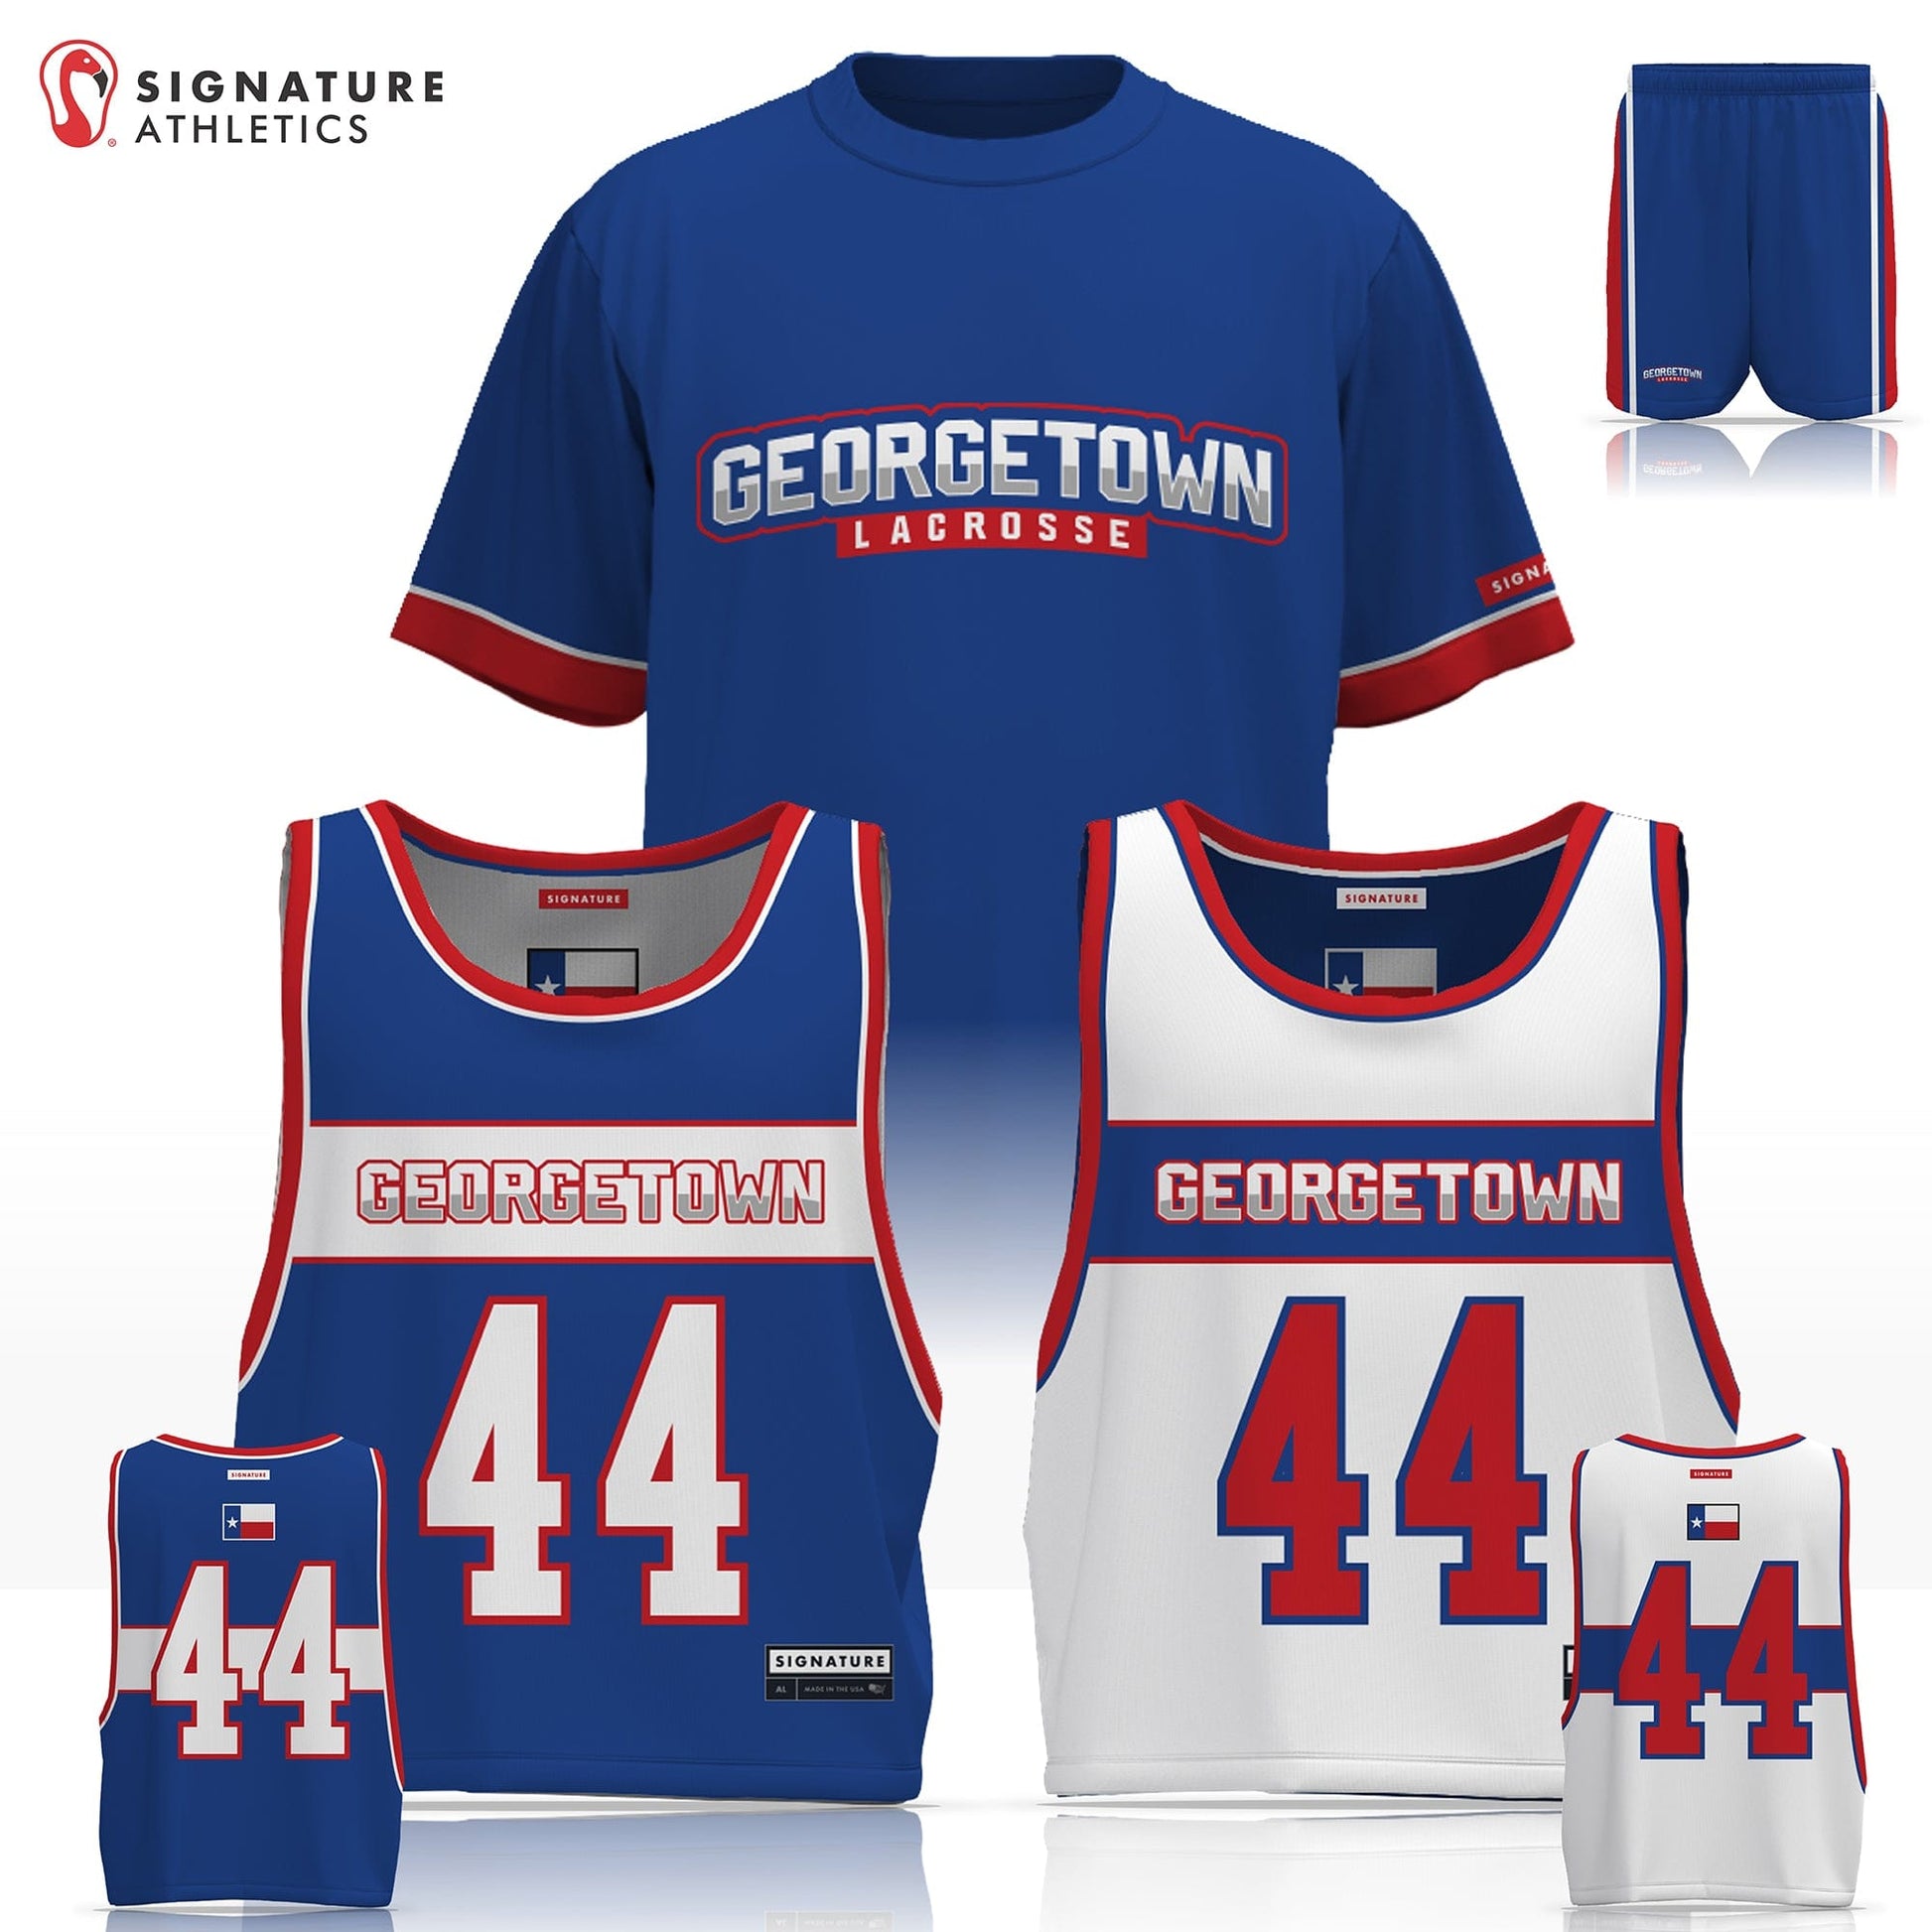 Georgetown Youth Lacrosse Men's 3 Piece Player Game Package: 3rd/4th (Lightning) Signature Lacrosse